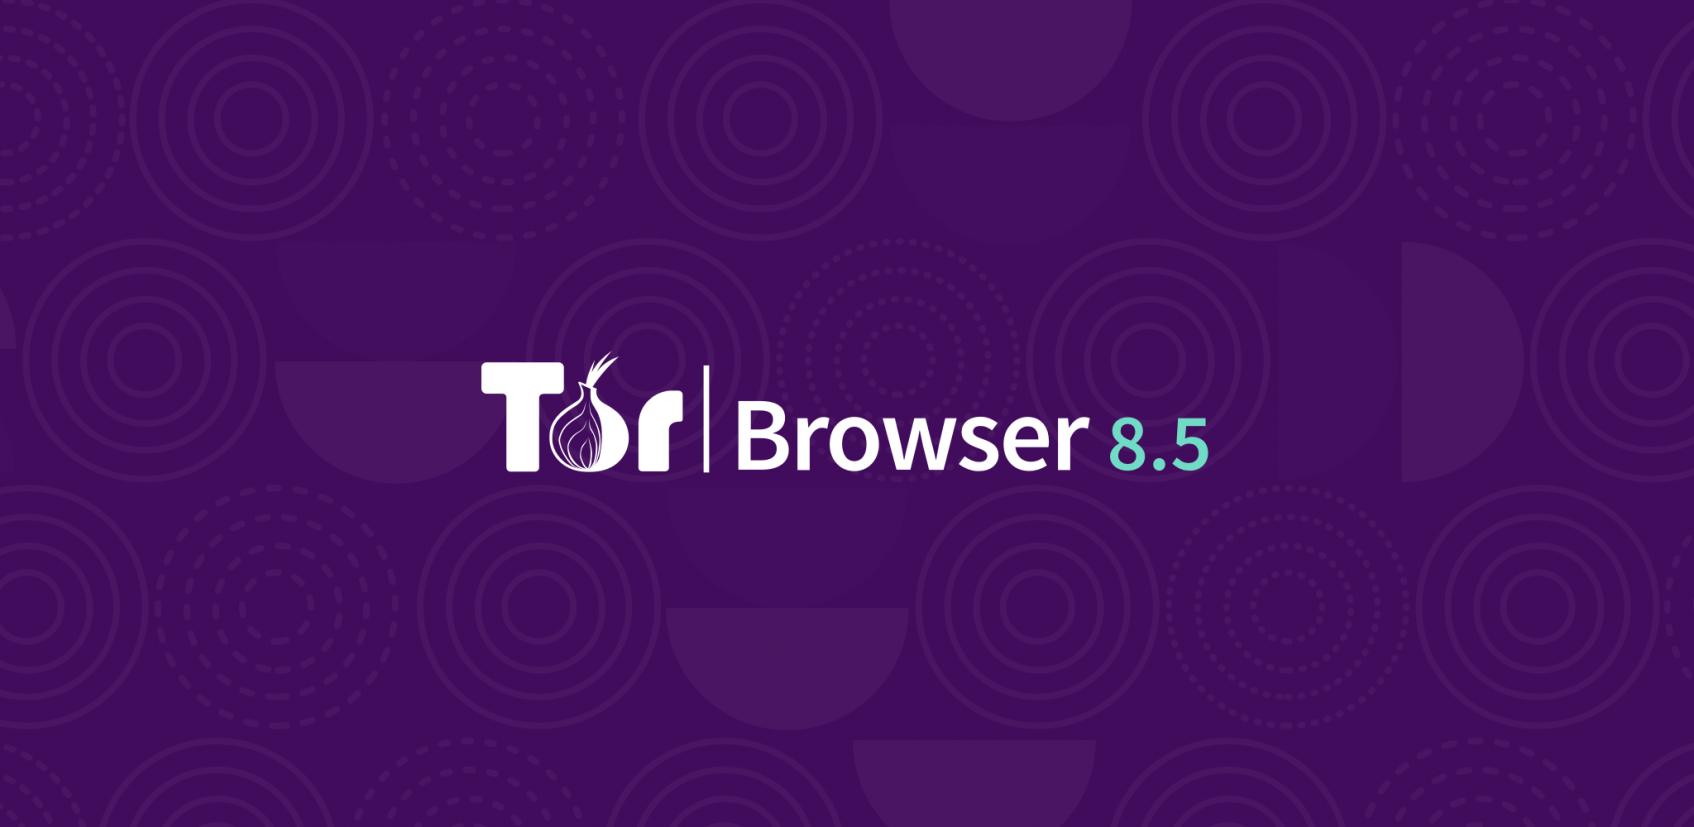 tor browser android download